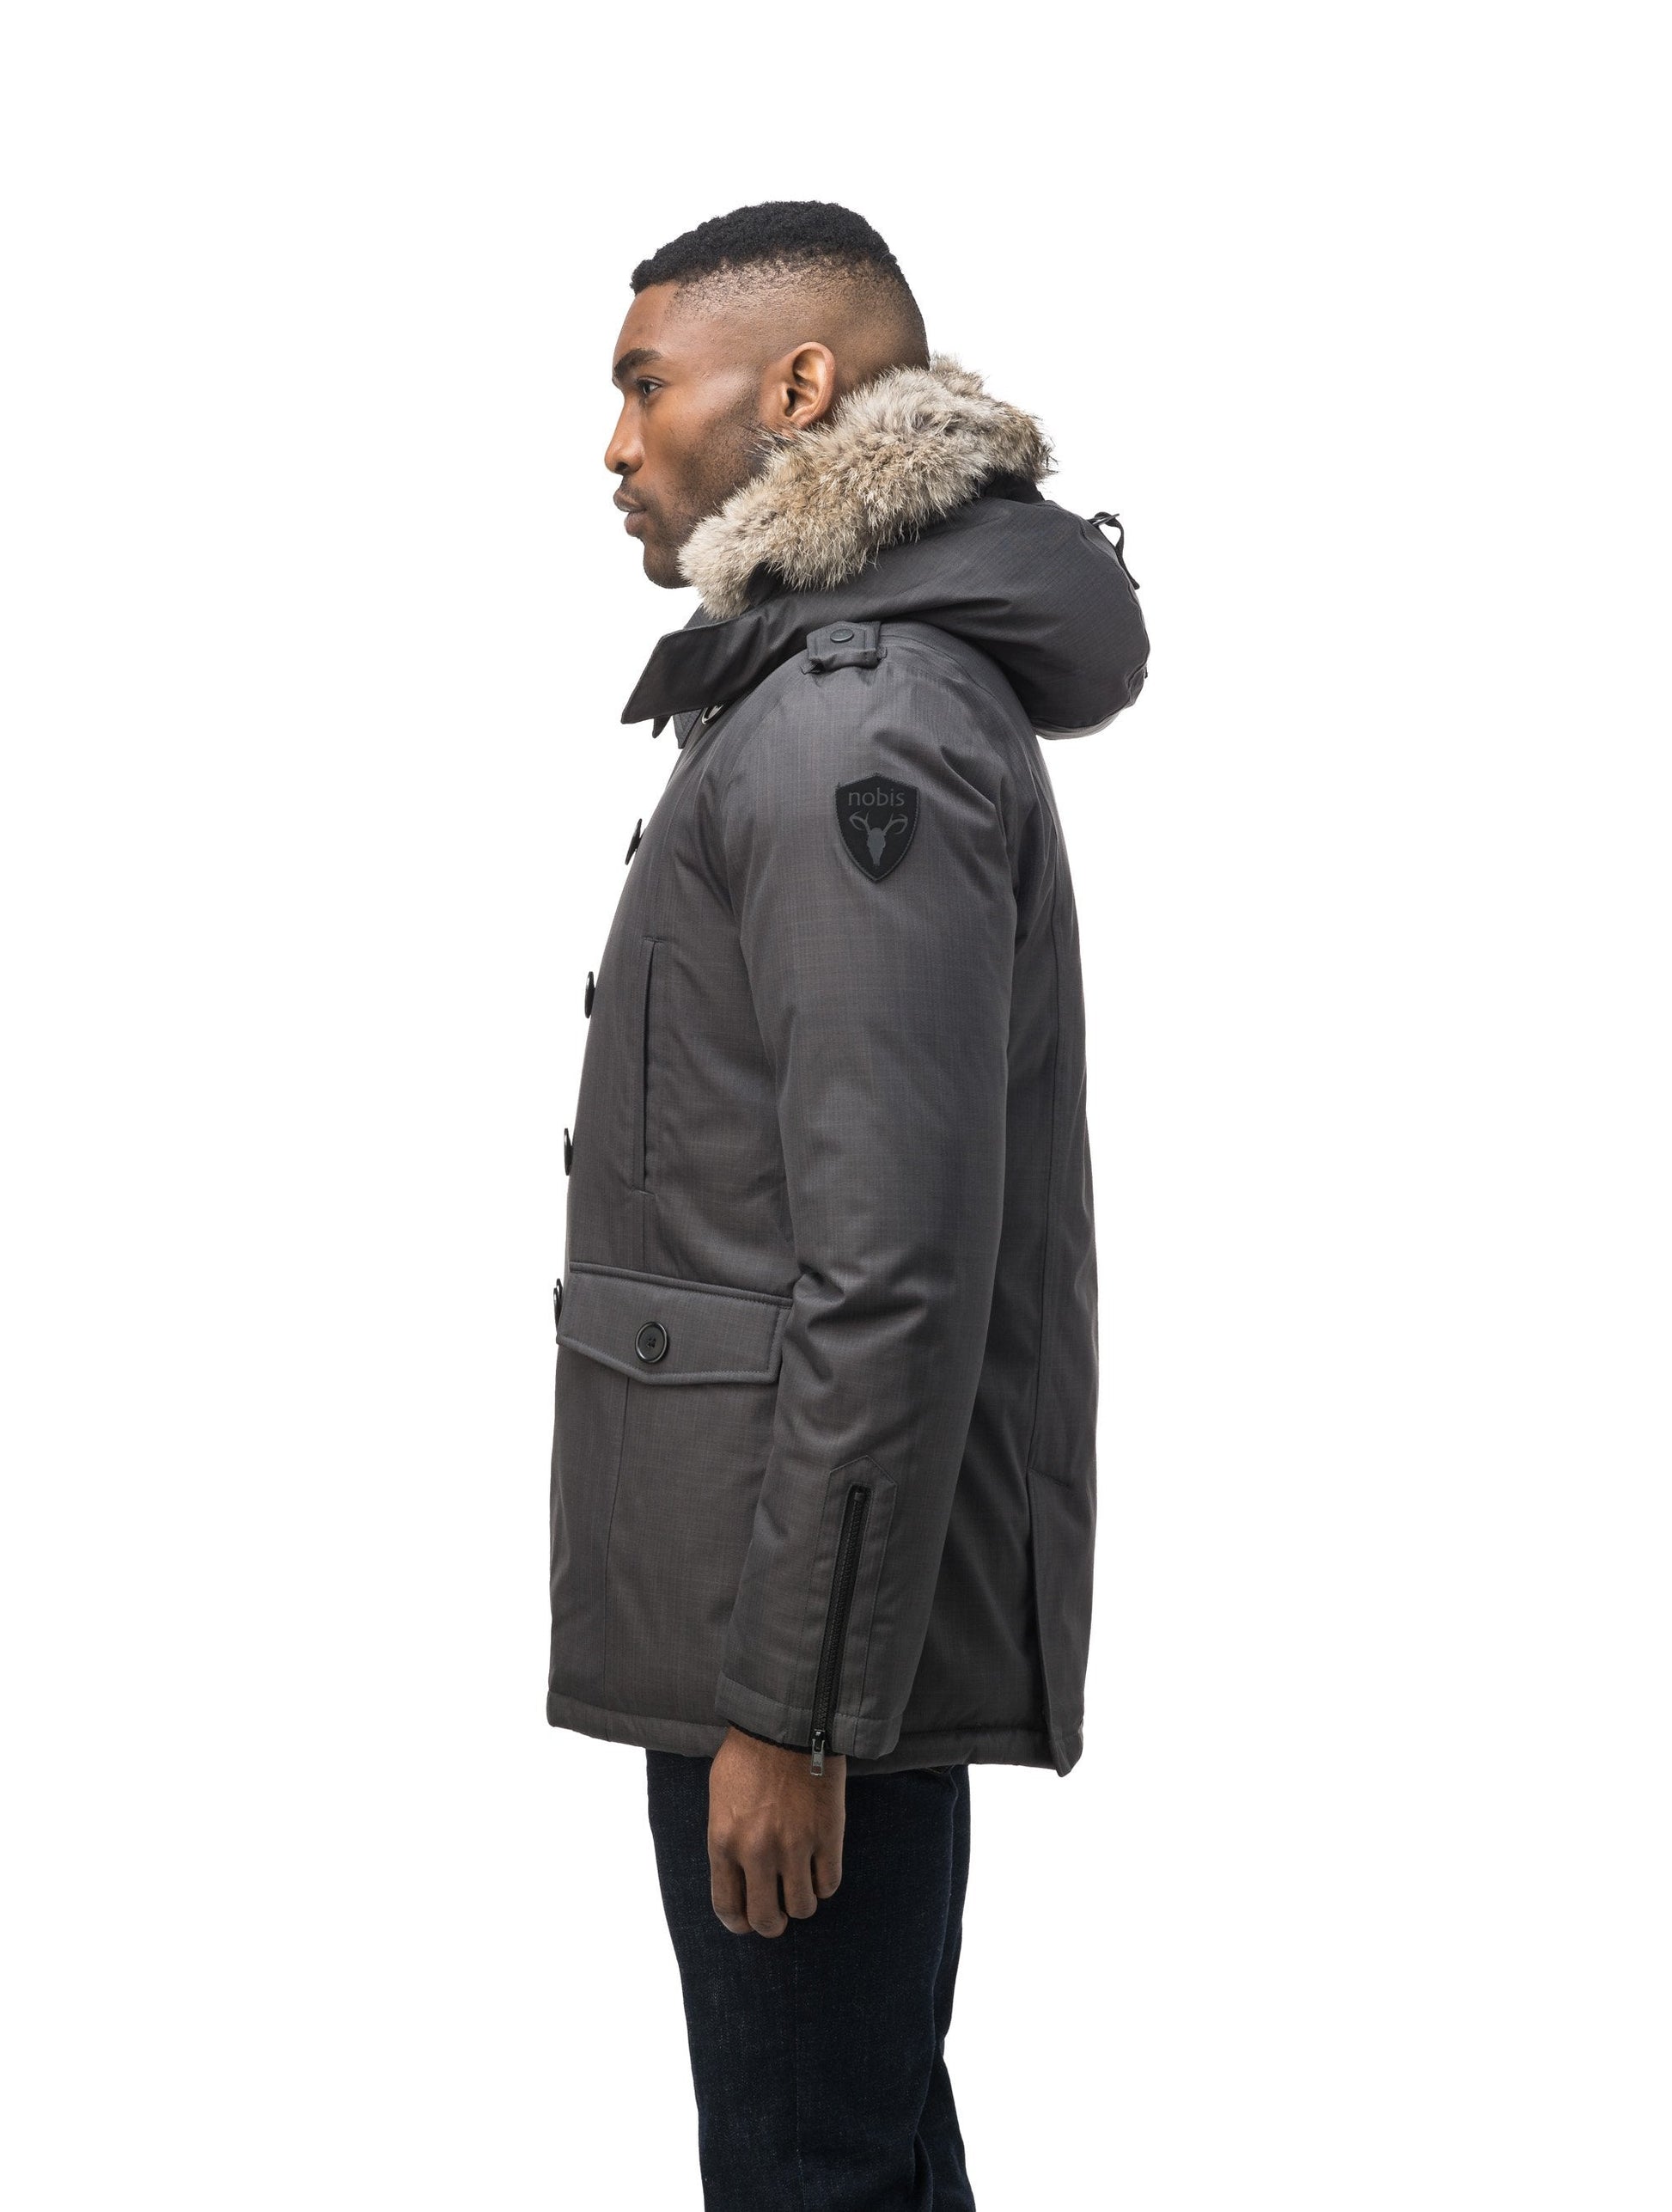 Men's double breasted down filled parka in CH Steel Grey